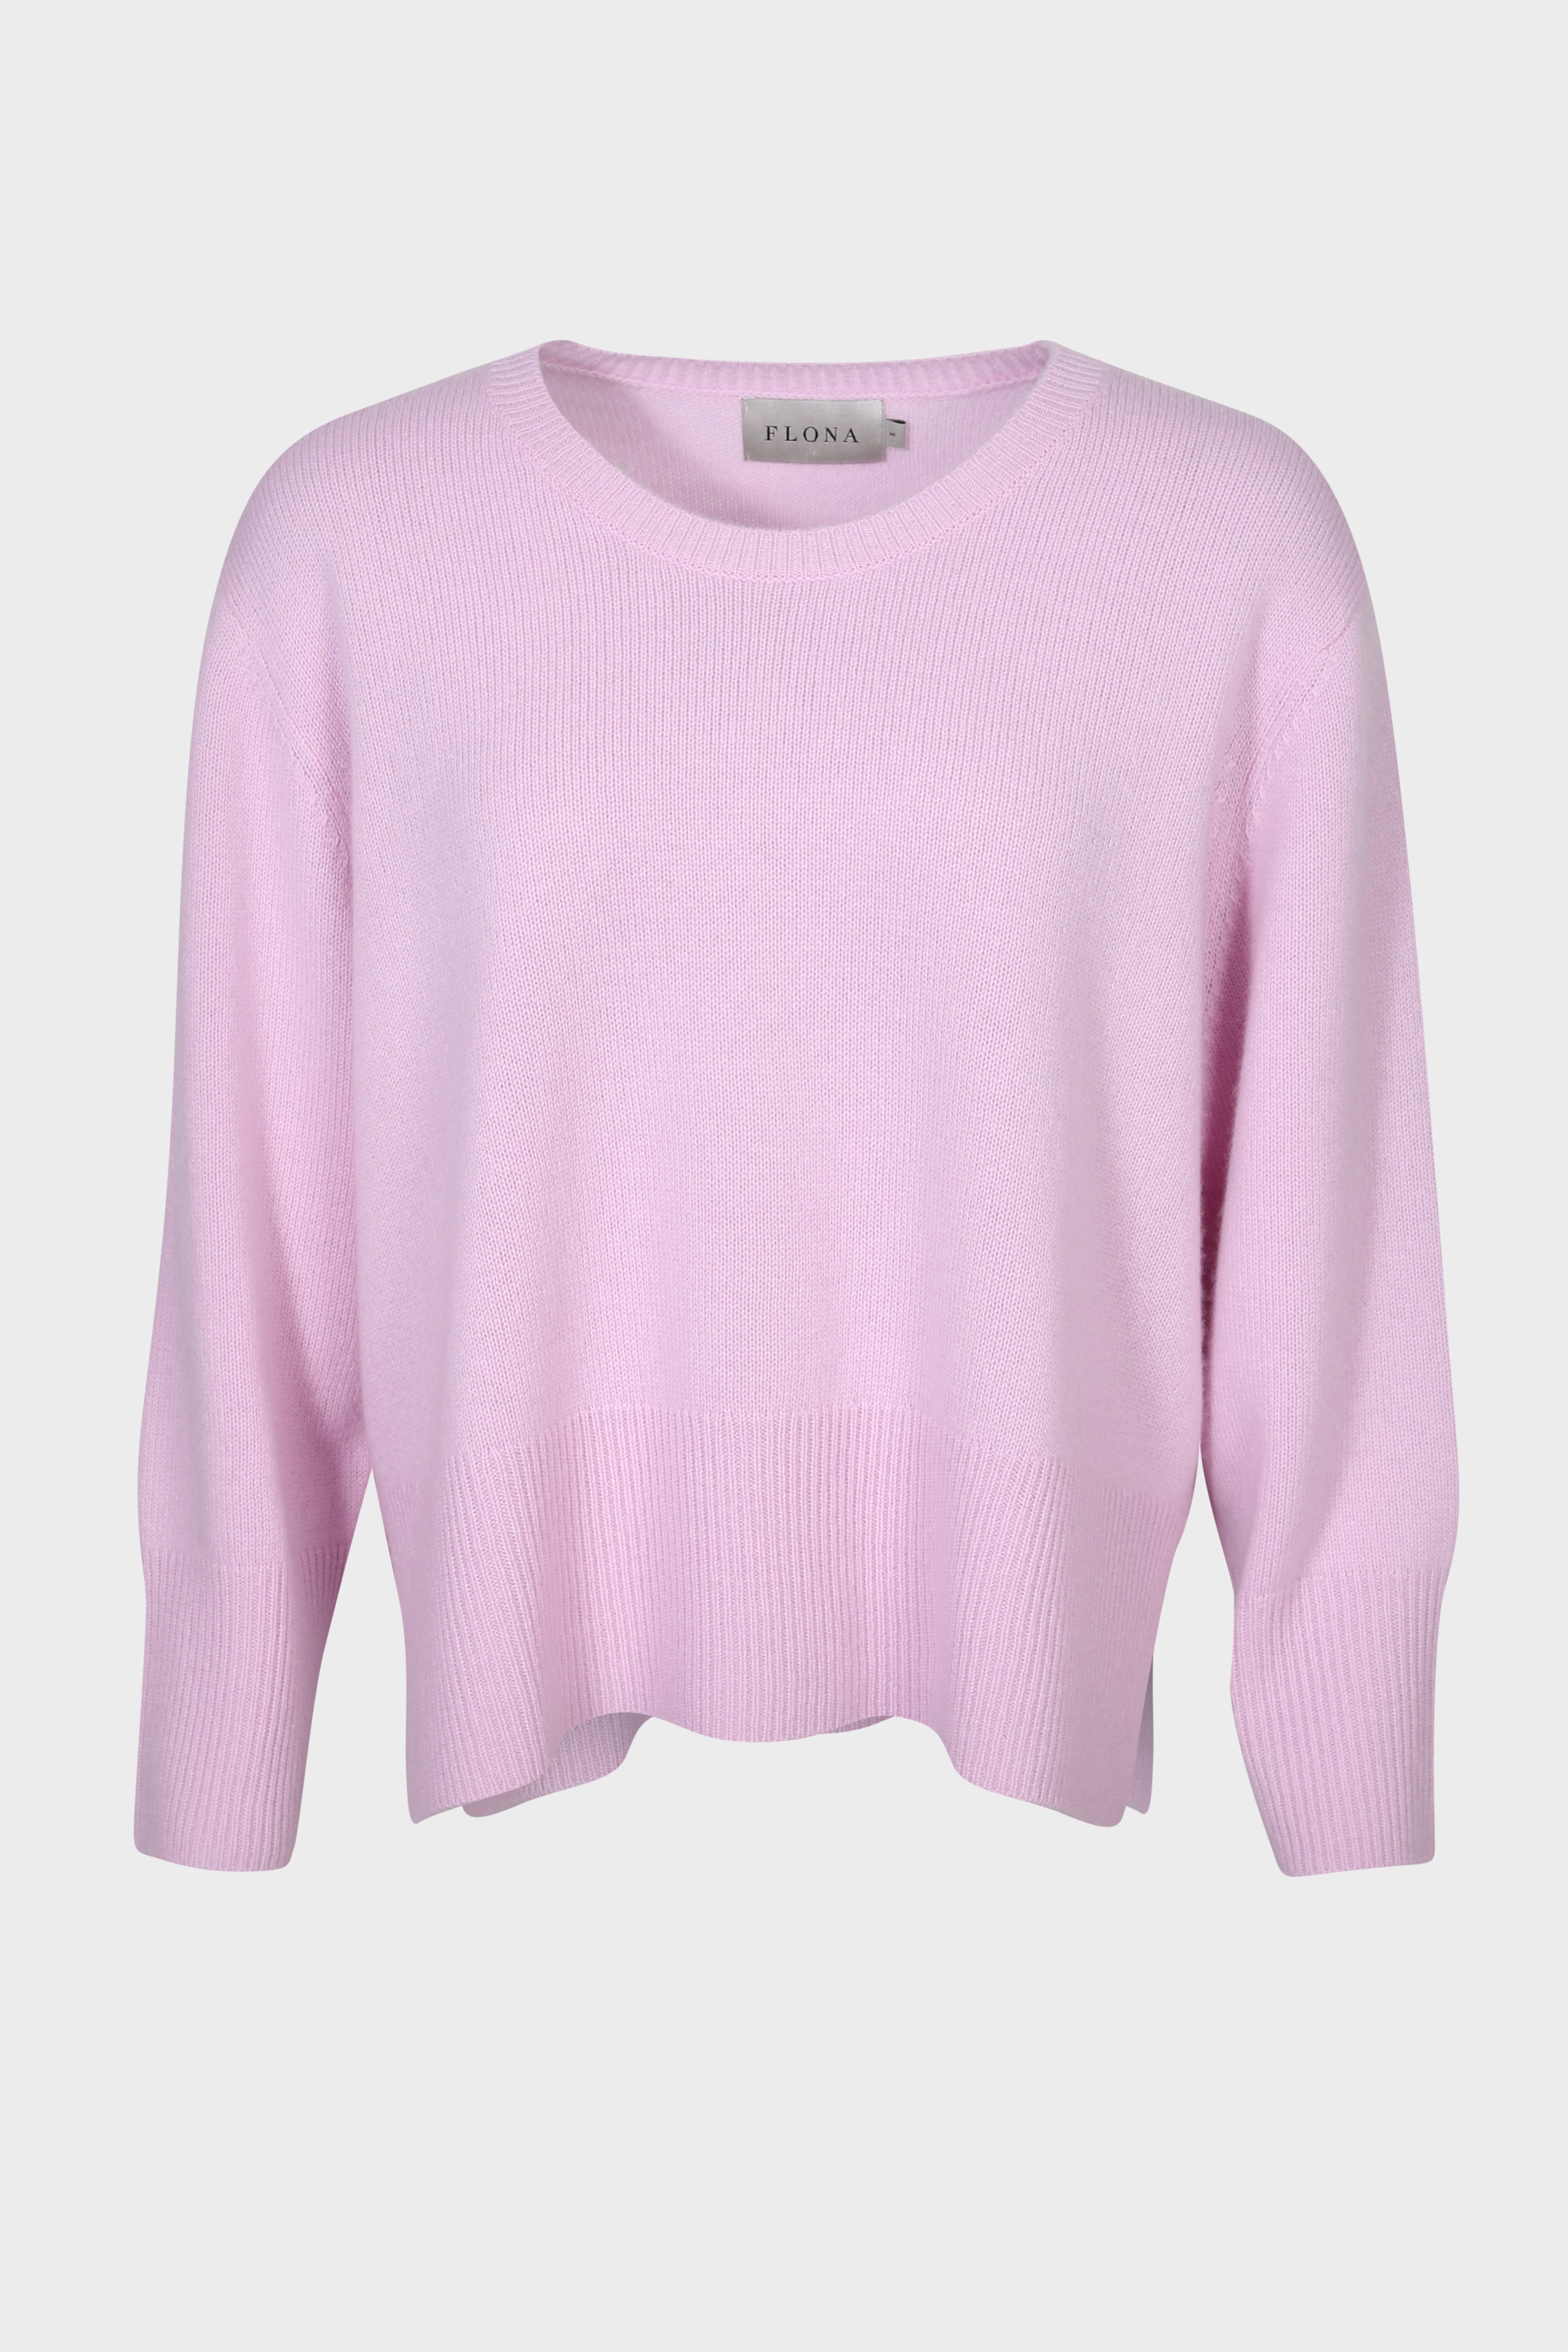 FLONA Cashmere Sweater in Pink L